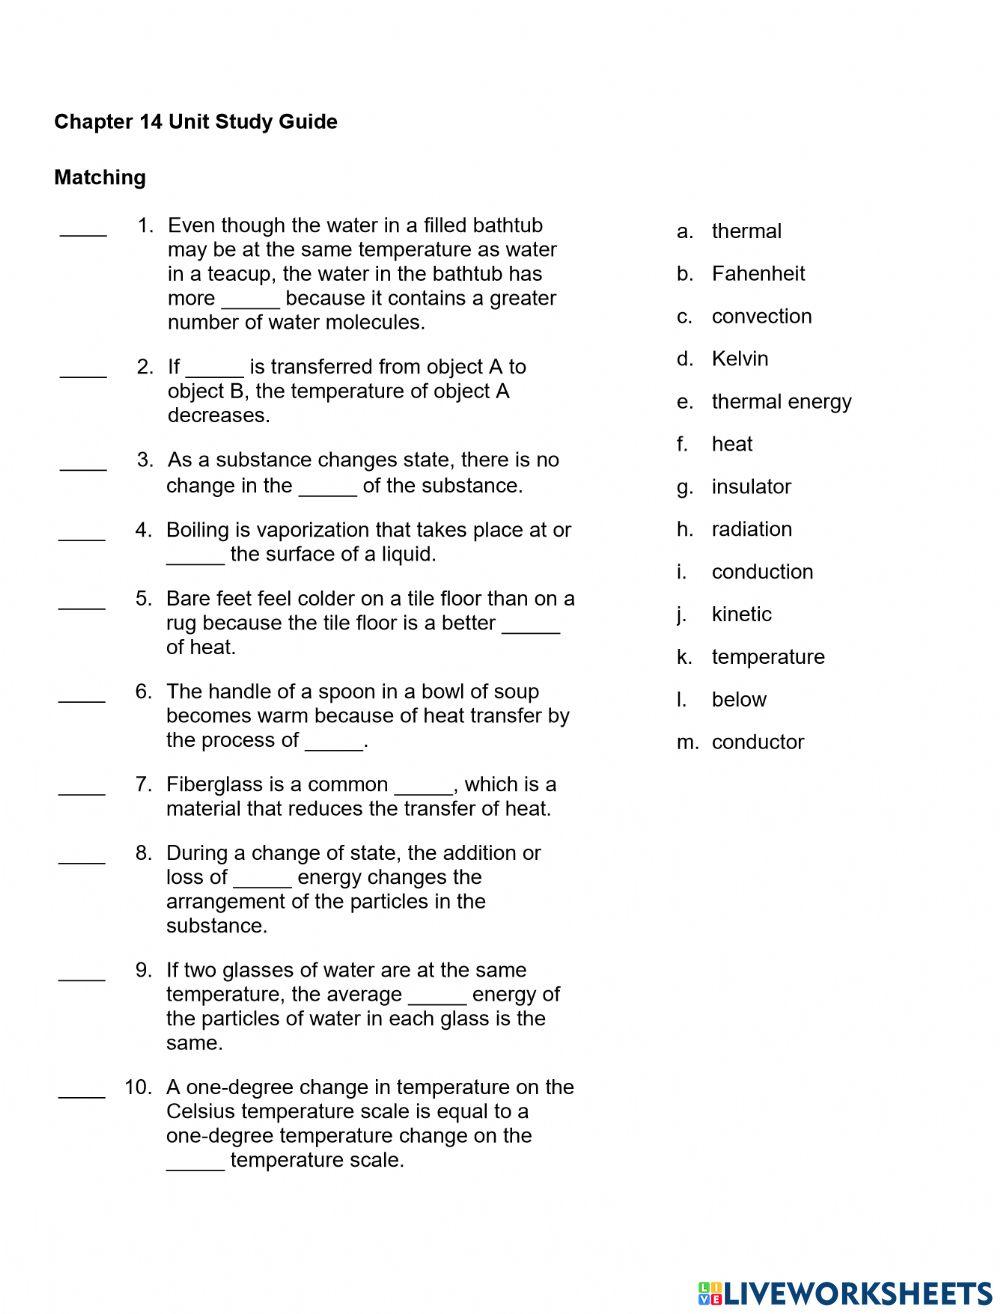 PS-14-Study Guide page 1